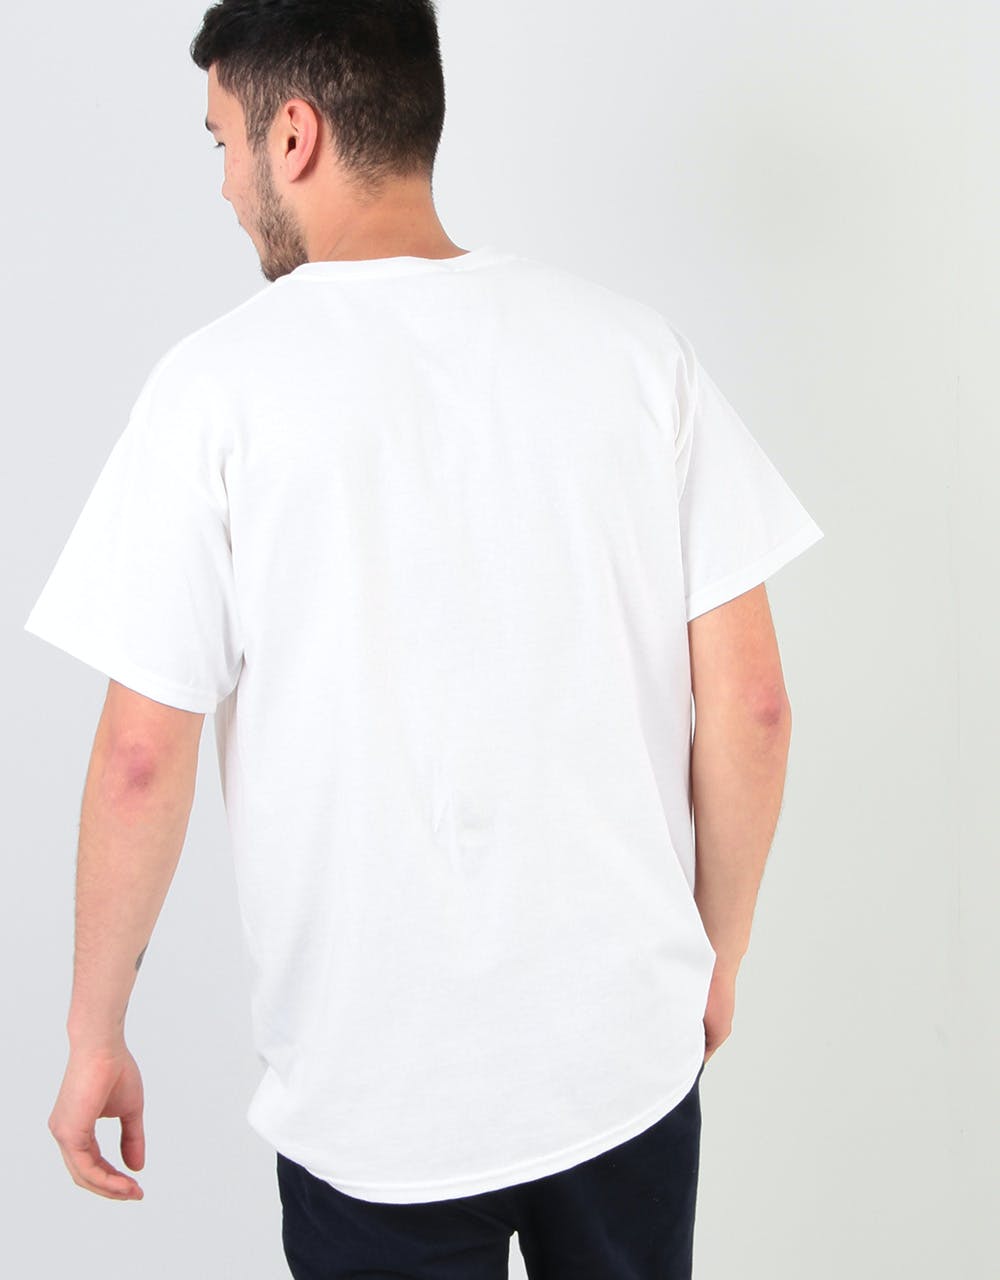 Route One Still Life T-Shirt - White